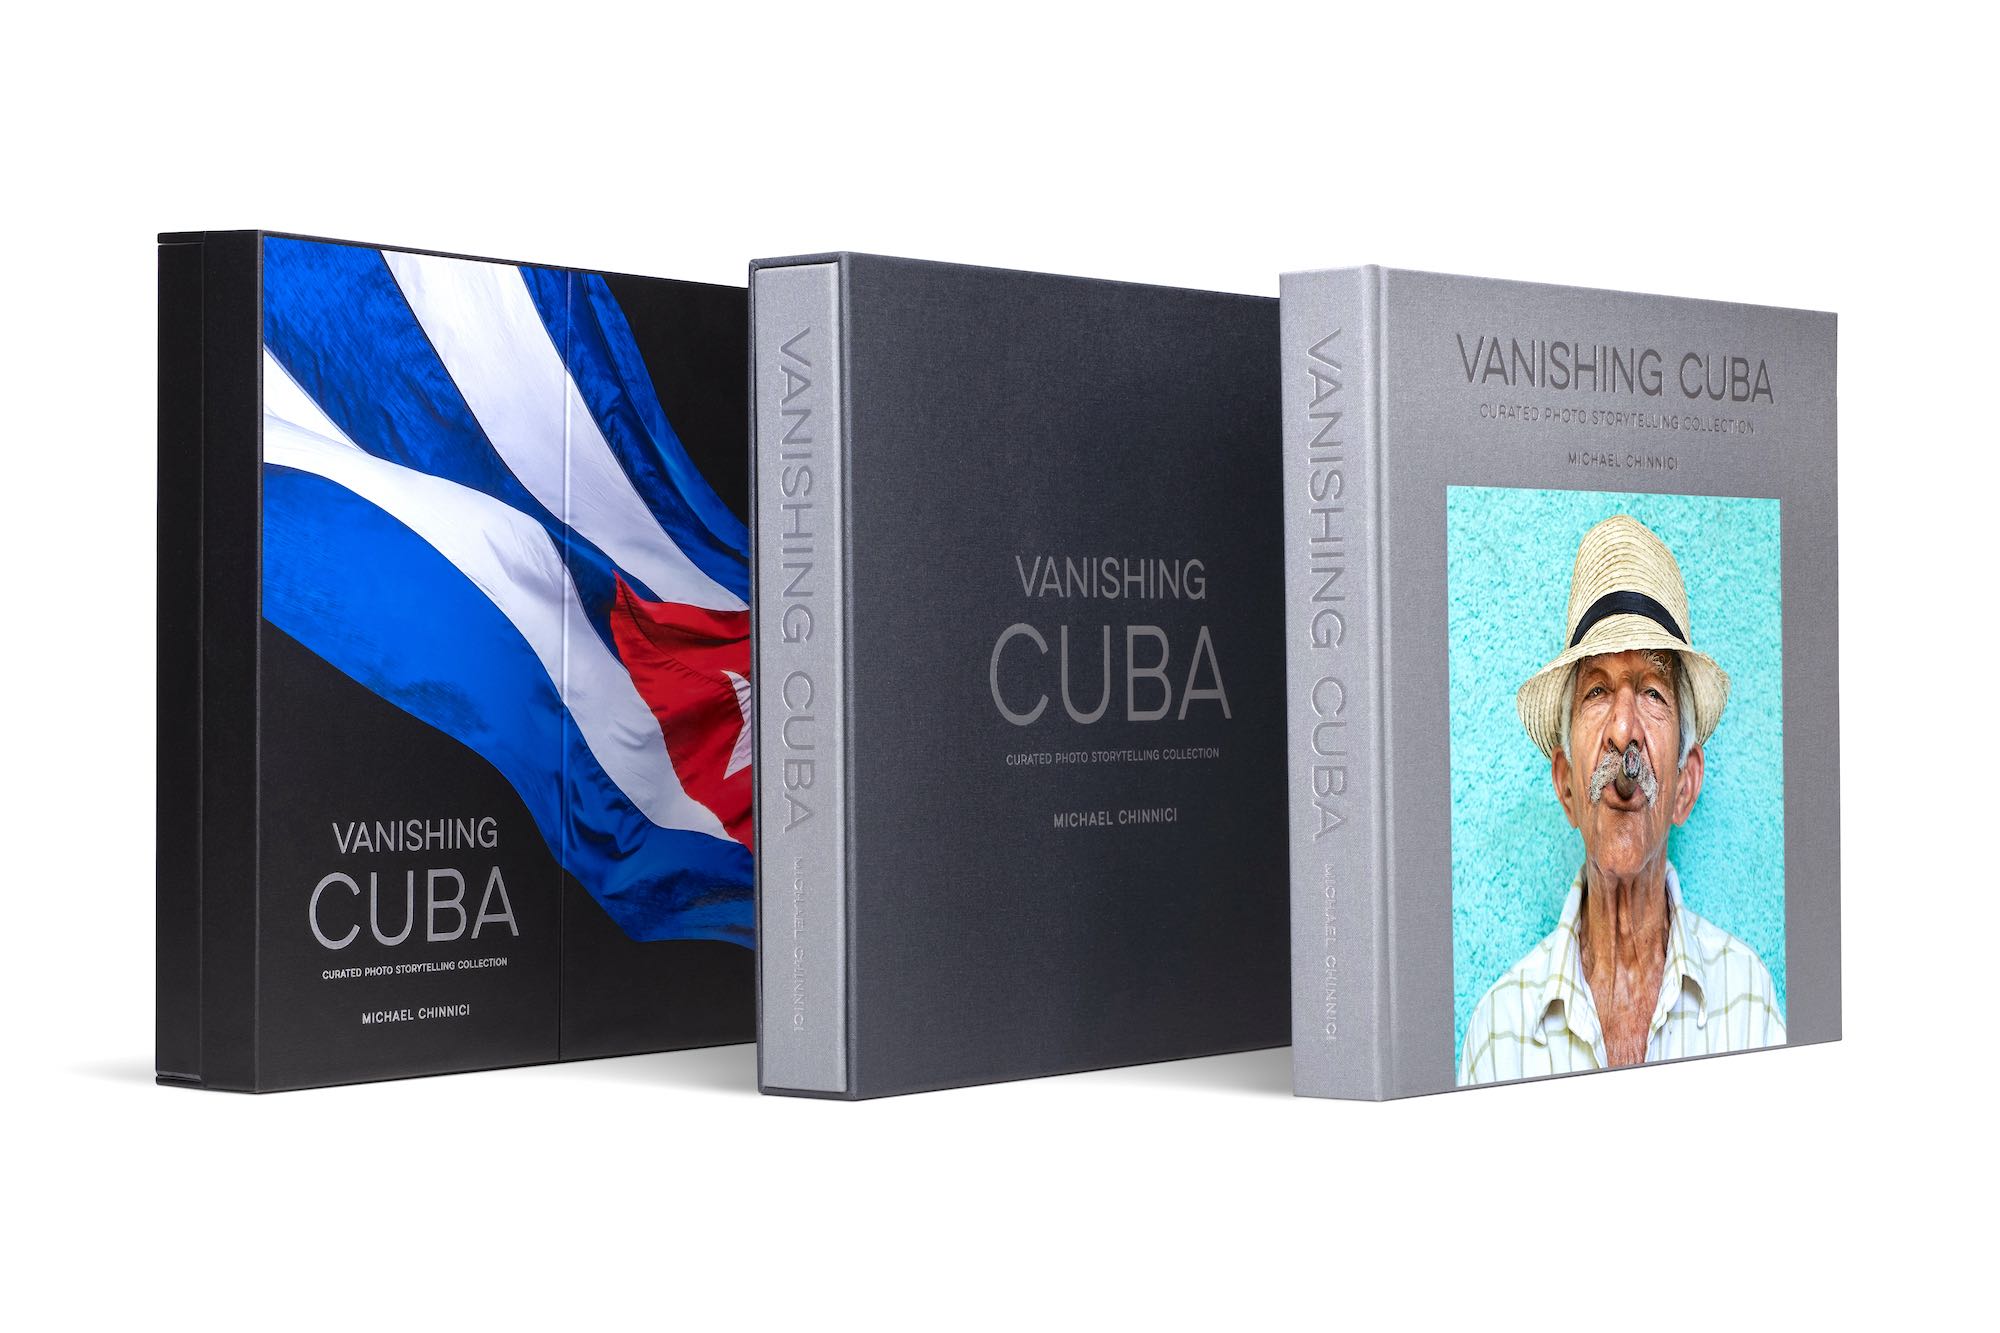 The Vanishing Cuba Book makes the perfect Holiday Gift!